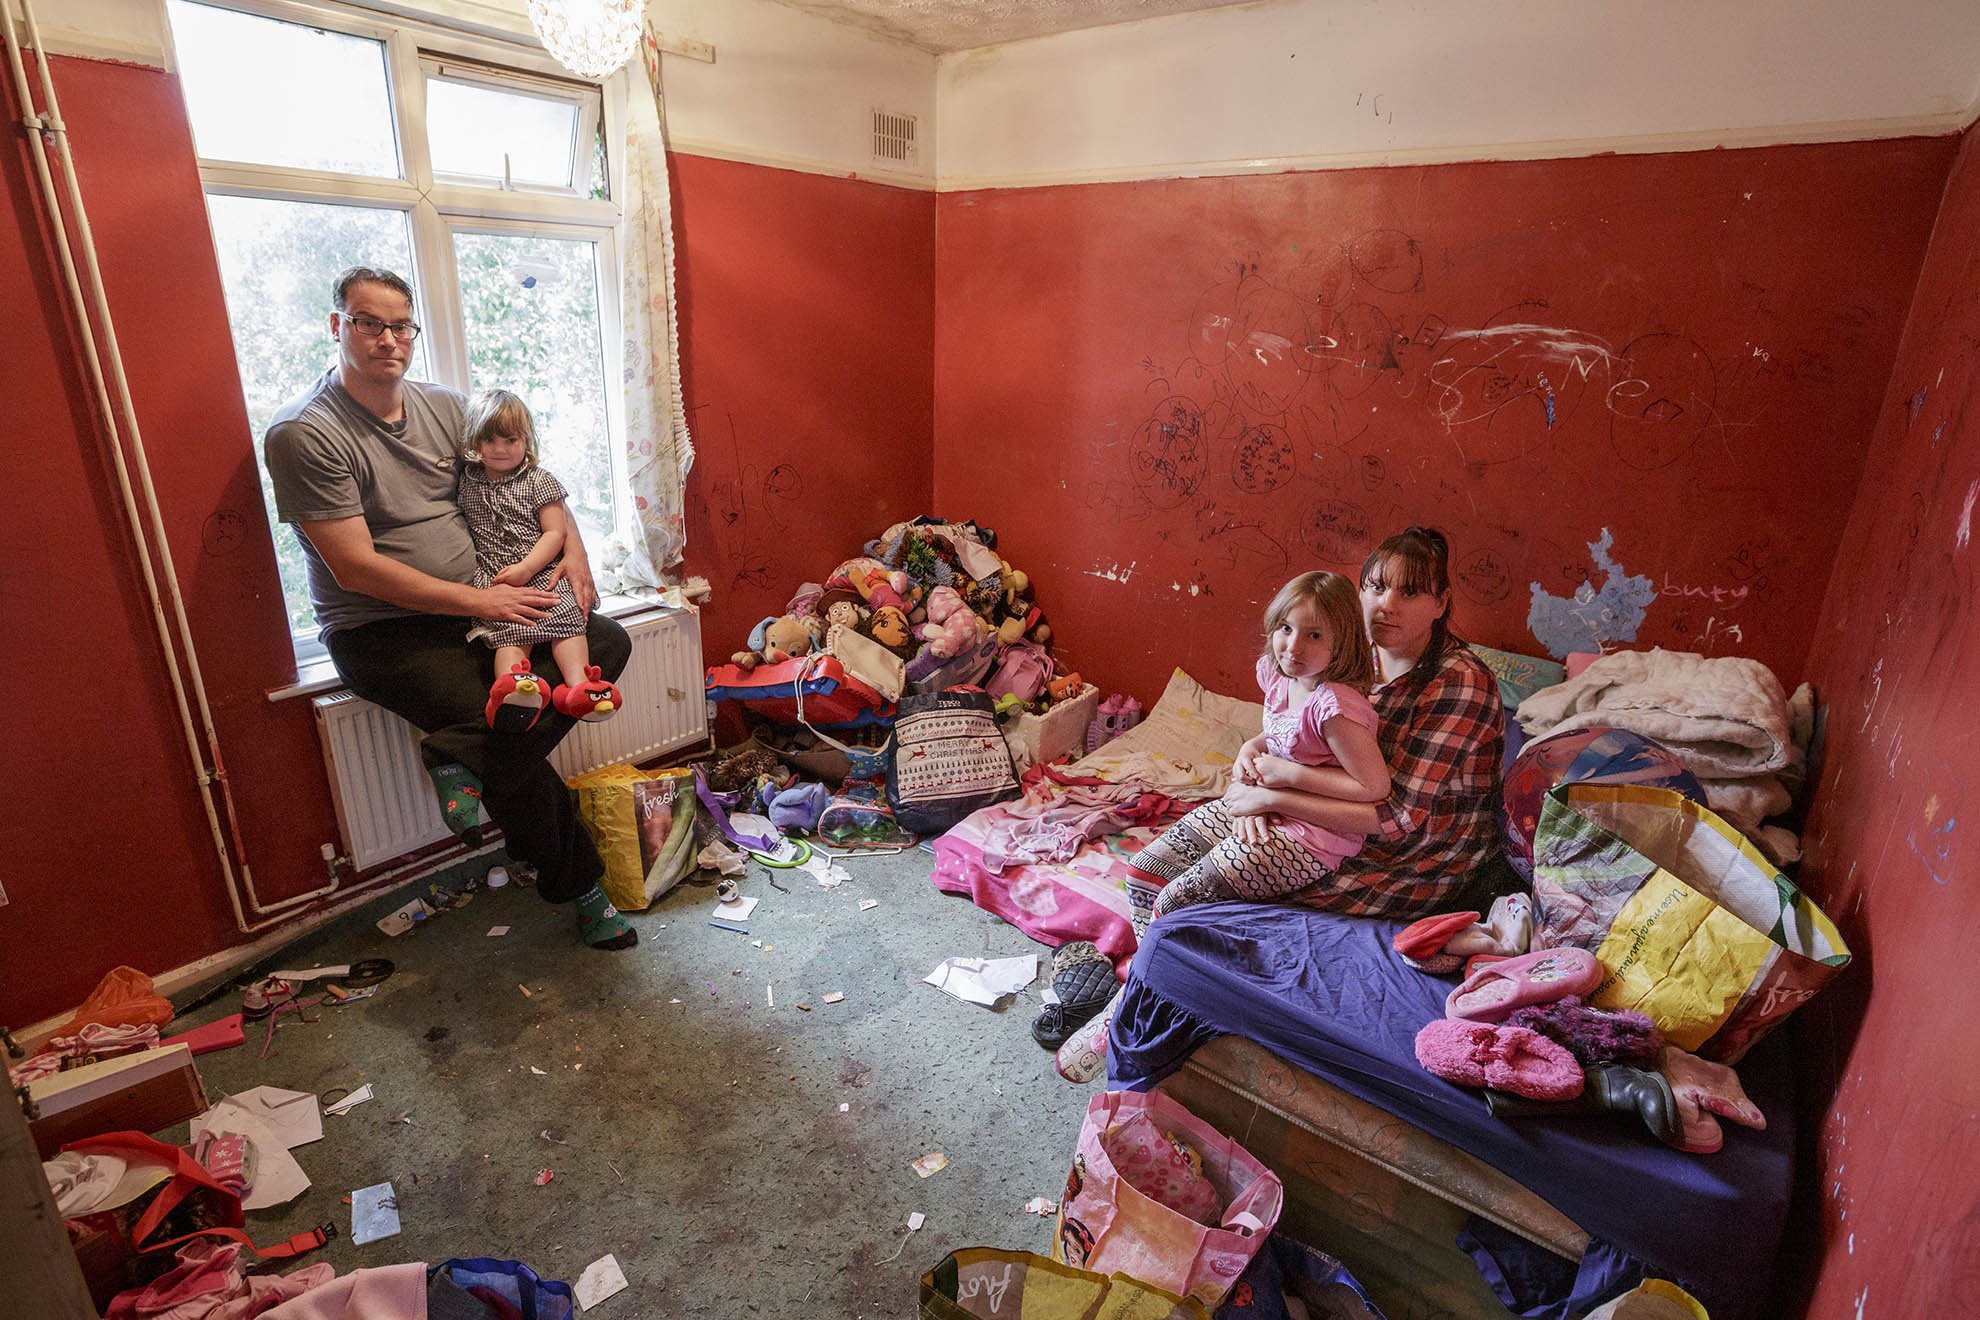  A family living in poverty in their Norfolk flat. The toys in the children’s bedroom have been donated. 